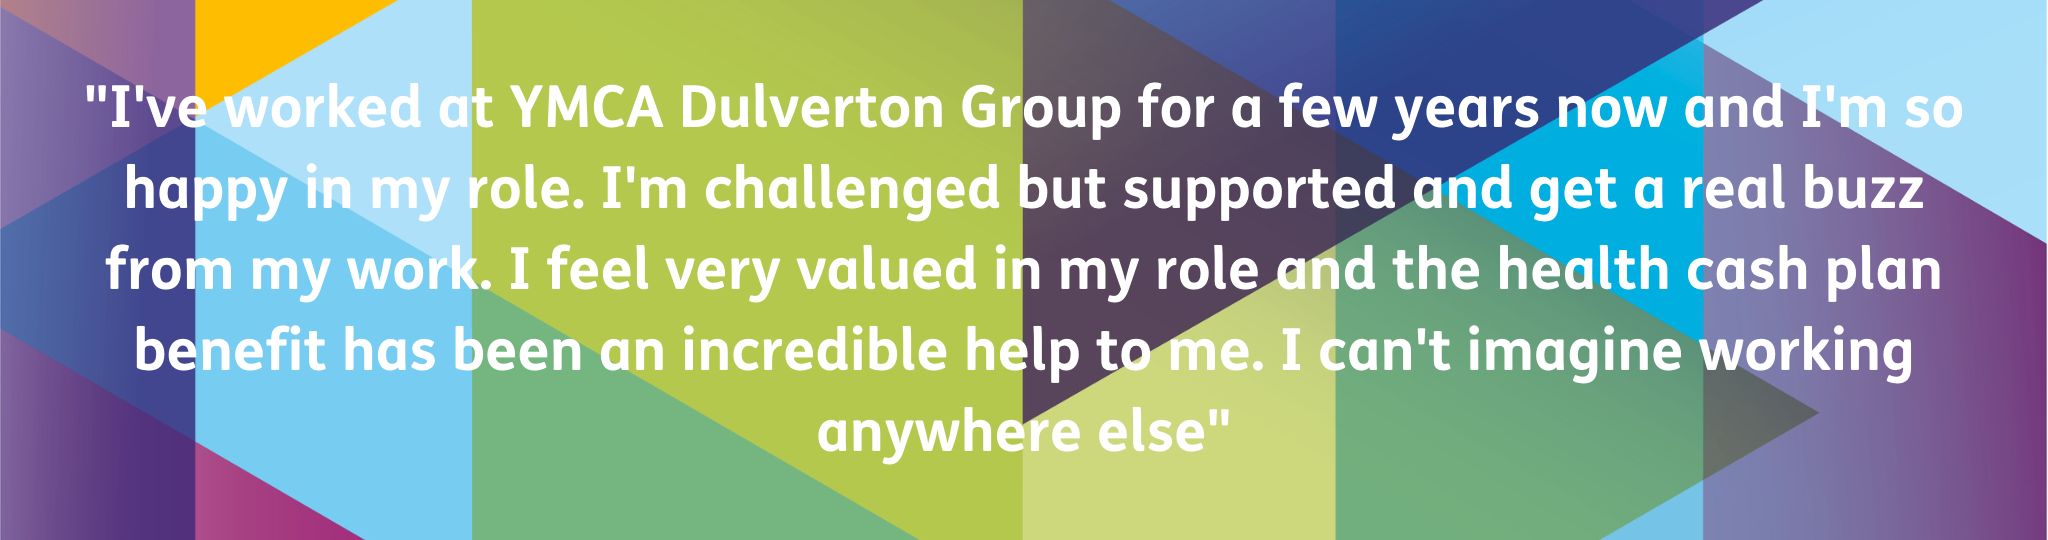 Staff testimonial on a colourful background that says: "I've worked at YMCA Dulverton Group for a few years now and I'm so happy in my role. I'm challenged but supported and get a real buzz from my work. I feel very valued in my role and the health cash plan benefit has been an incredible help to me. I can't imagine working anywhere else"